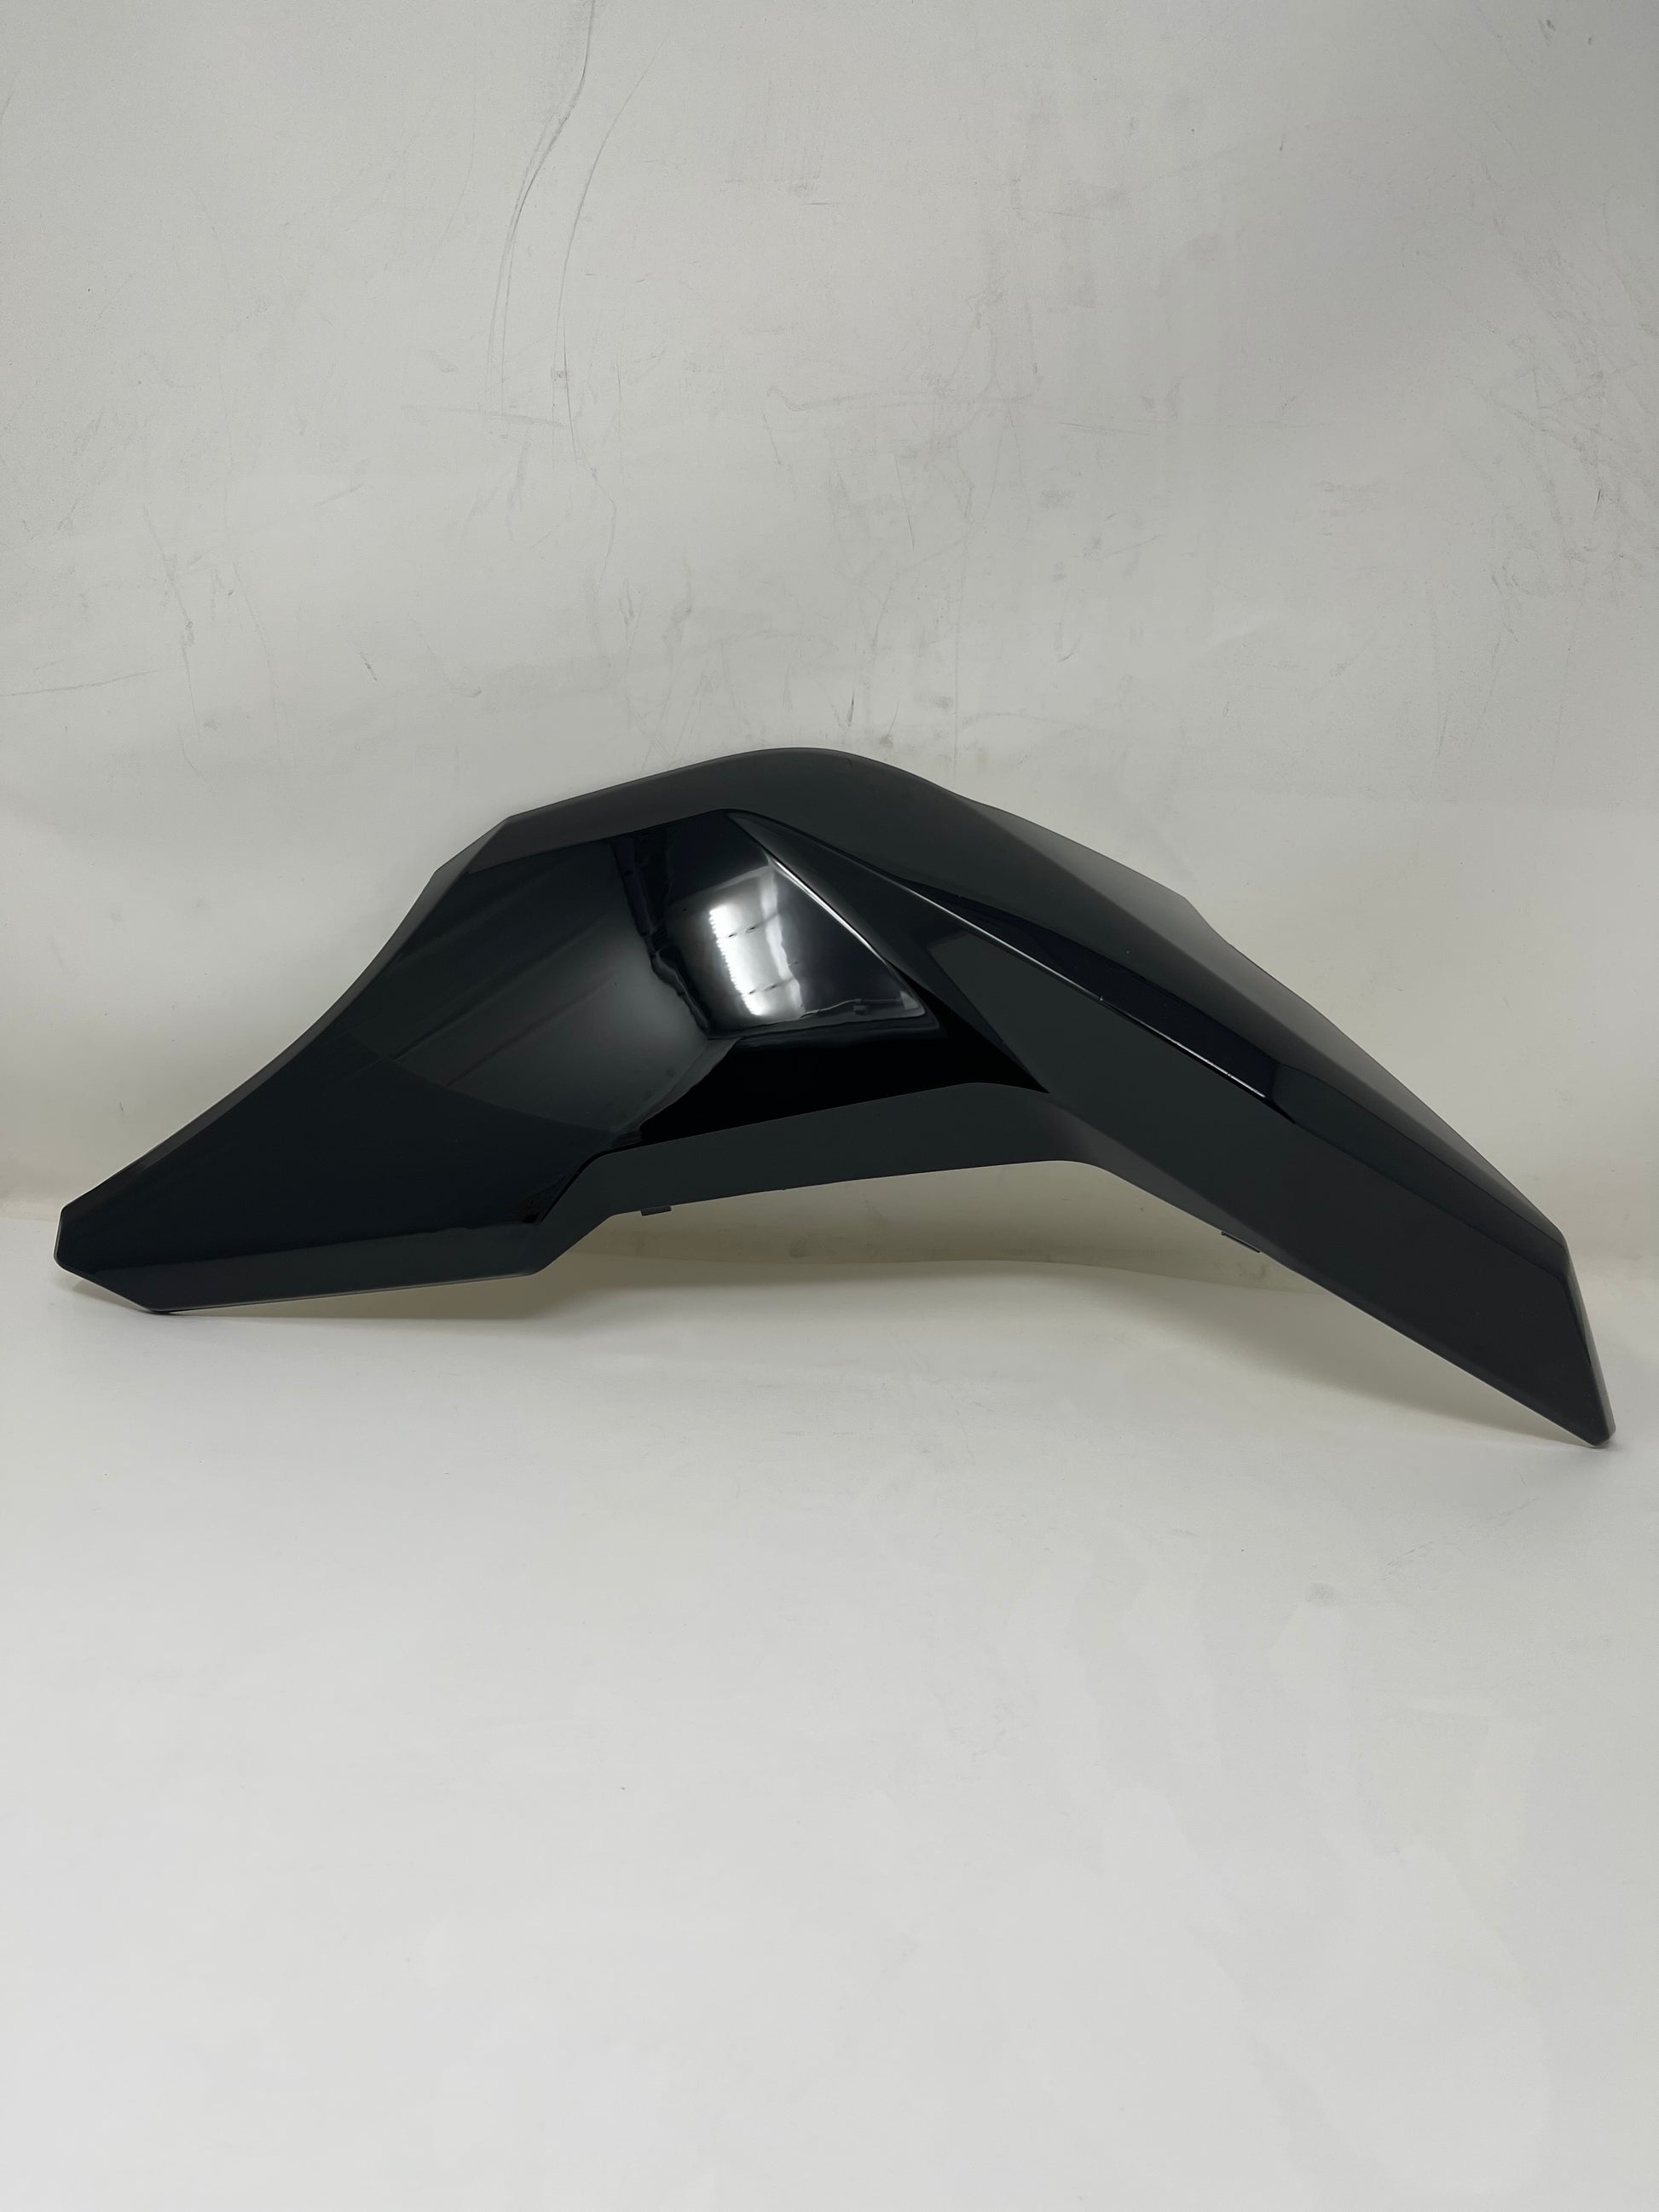 Right fuel tank cover for BD125-10 in black. Part # 125010003